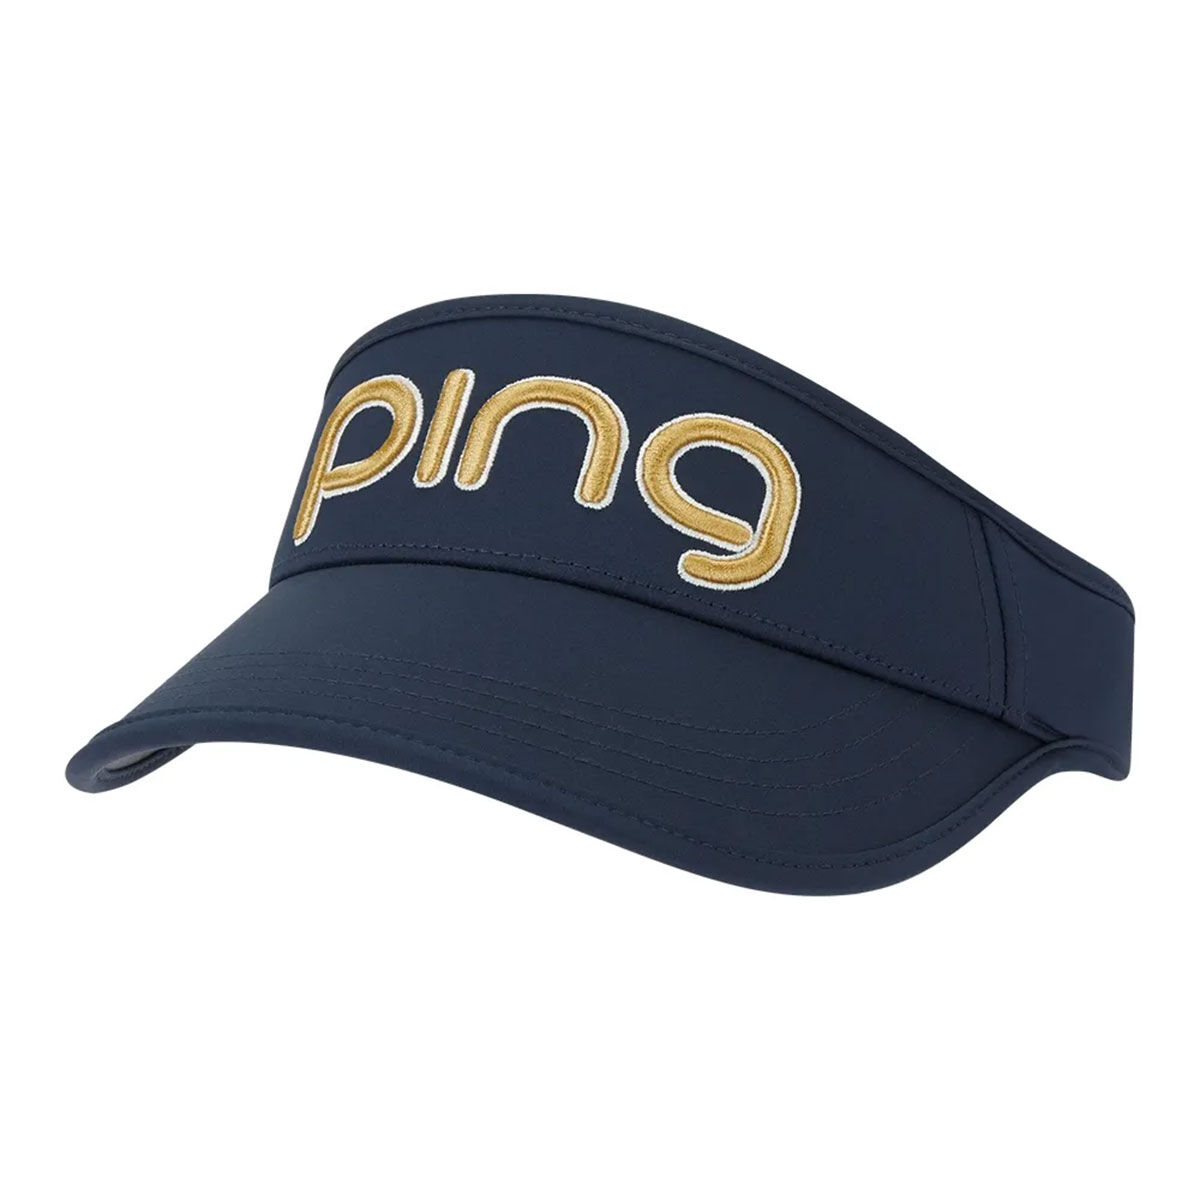 PING Men's Blue, White and Black Embroidered G Le3 Tour Delta Golf Visor | American Golf, One Size von Ping